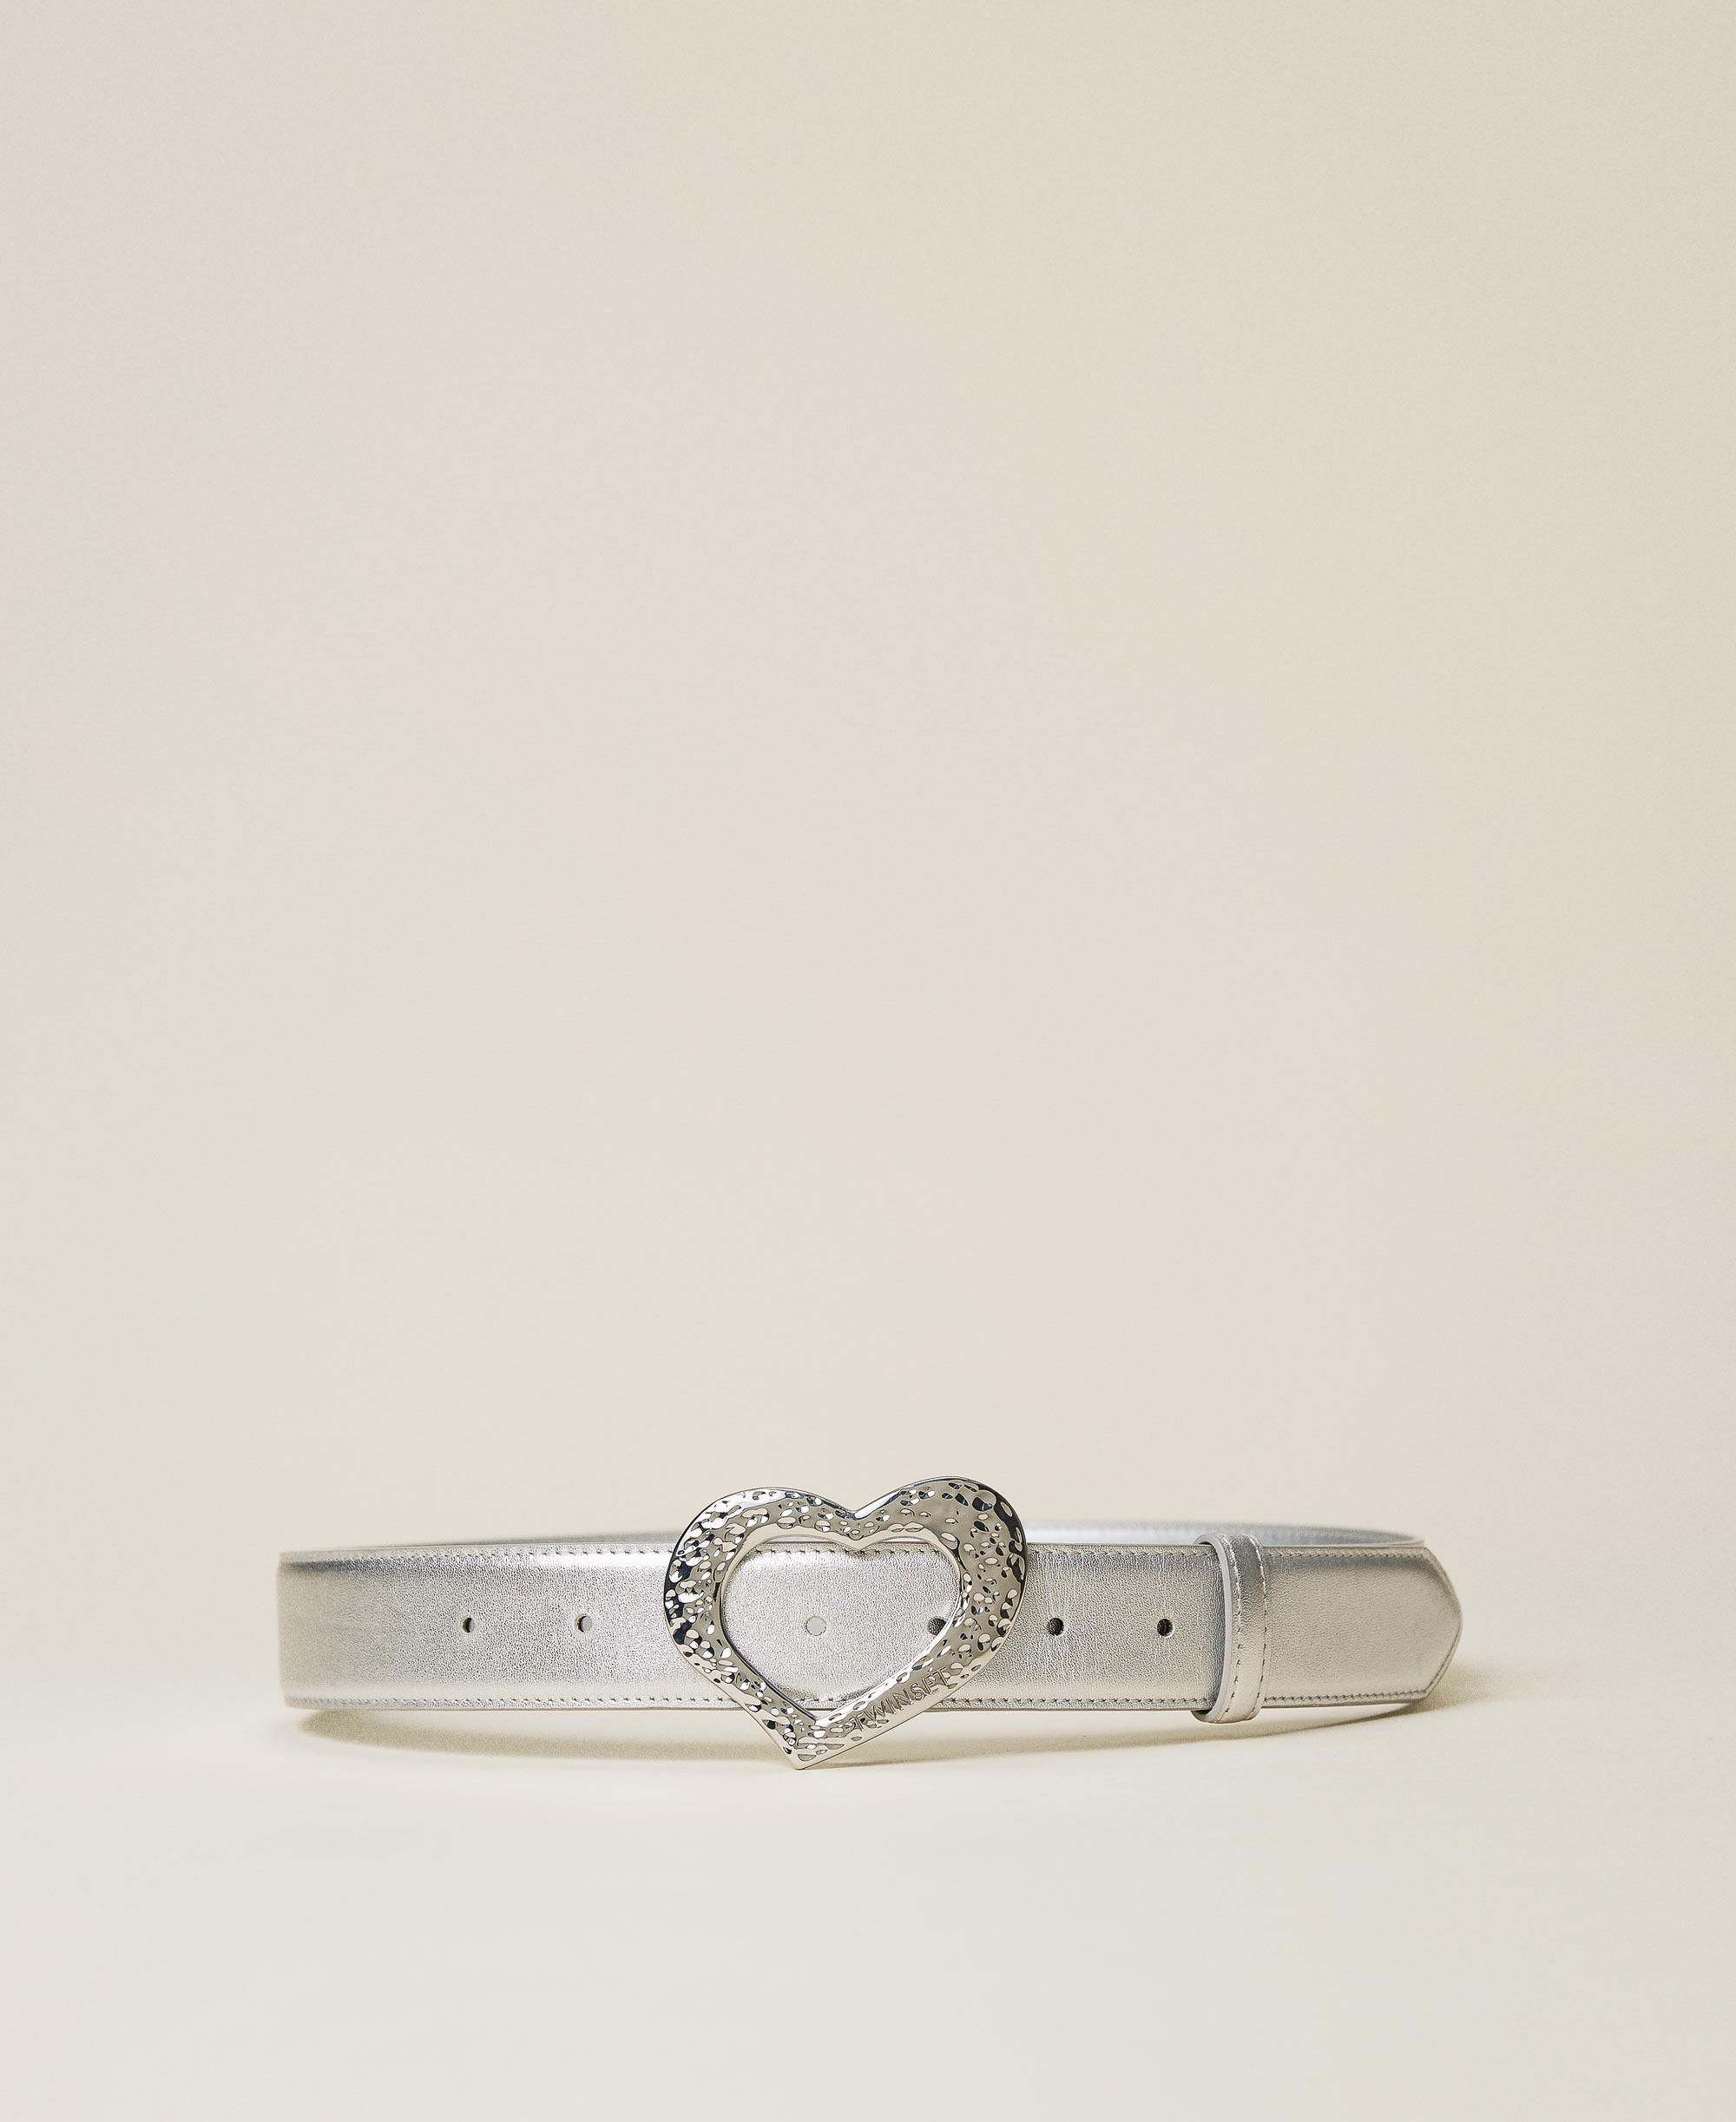 Leather belt with heart shaped buckle